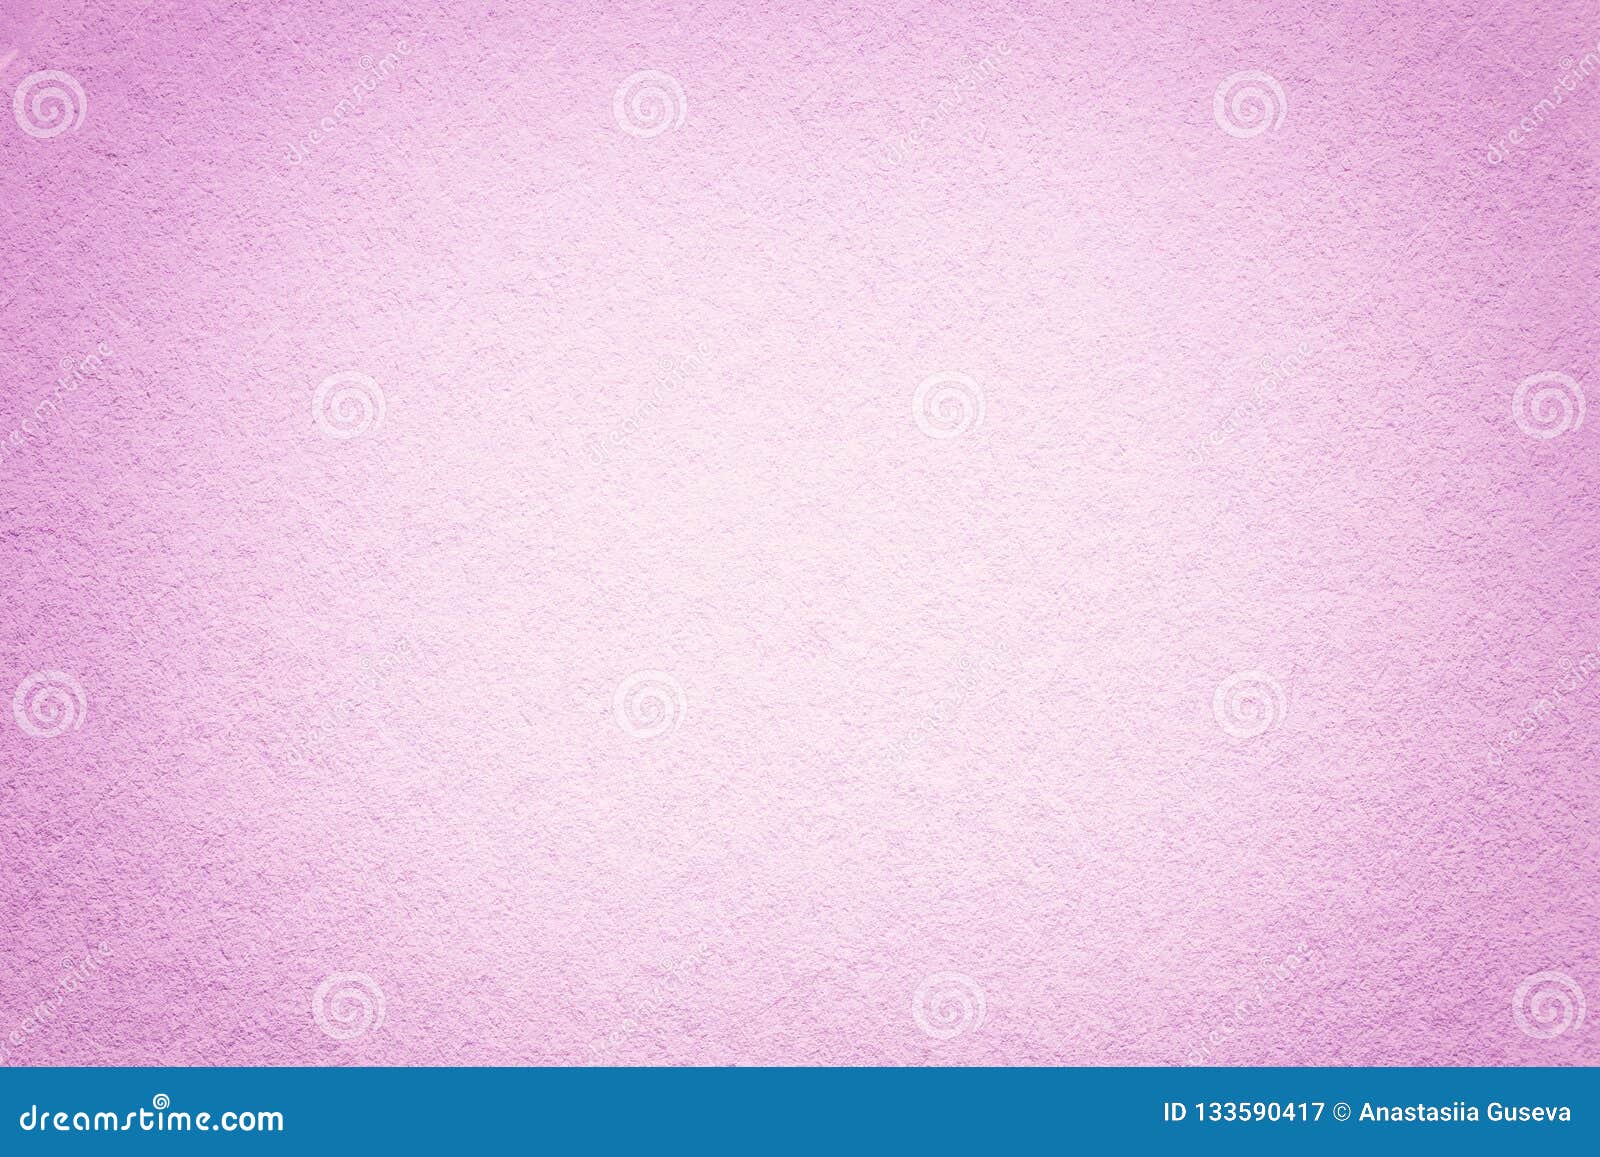 Texture of Old Light Pink Paper Background, Closeup. Structure of Dense ...